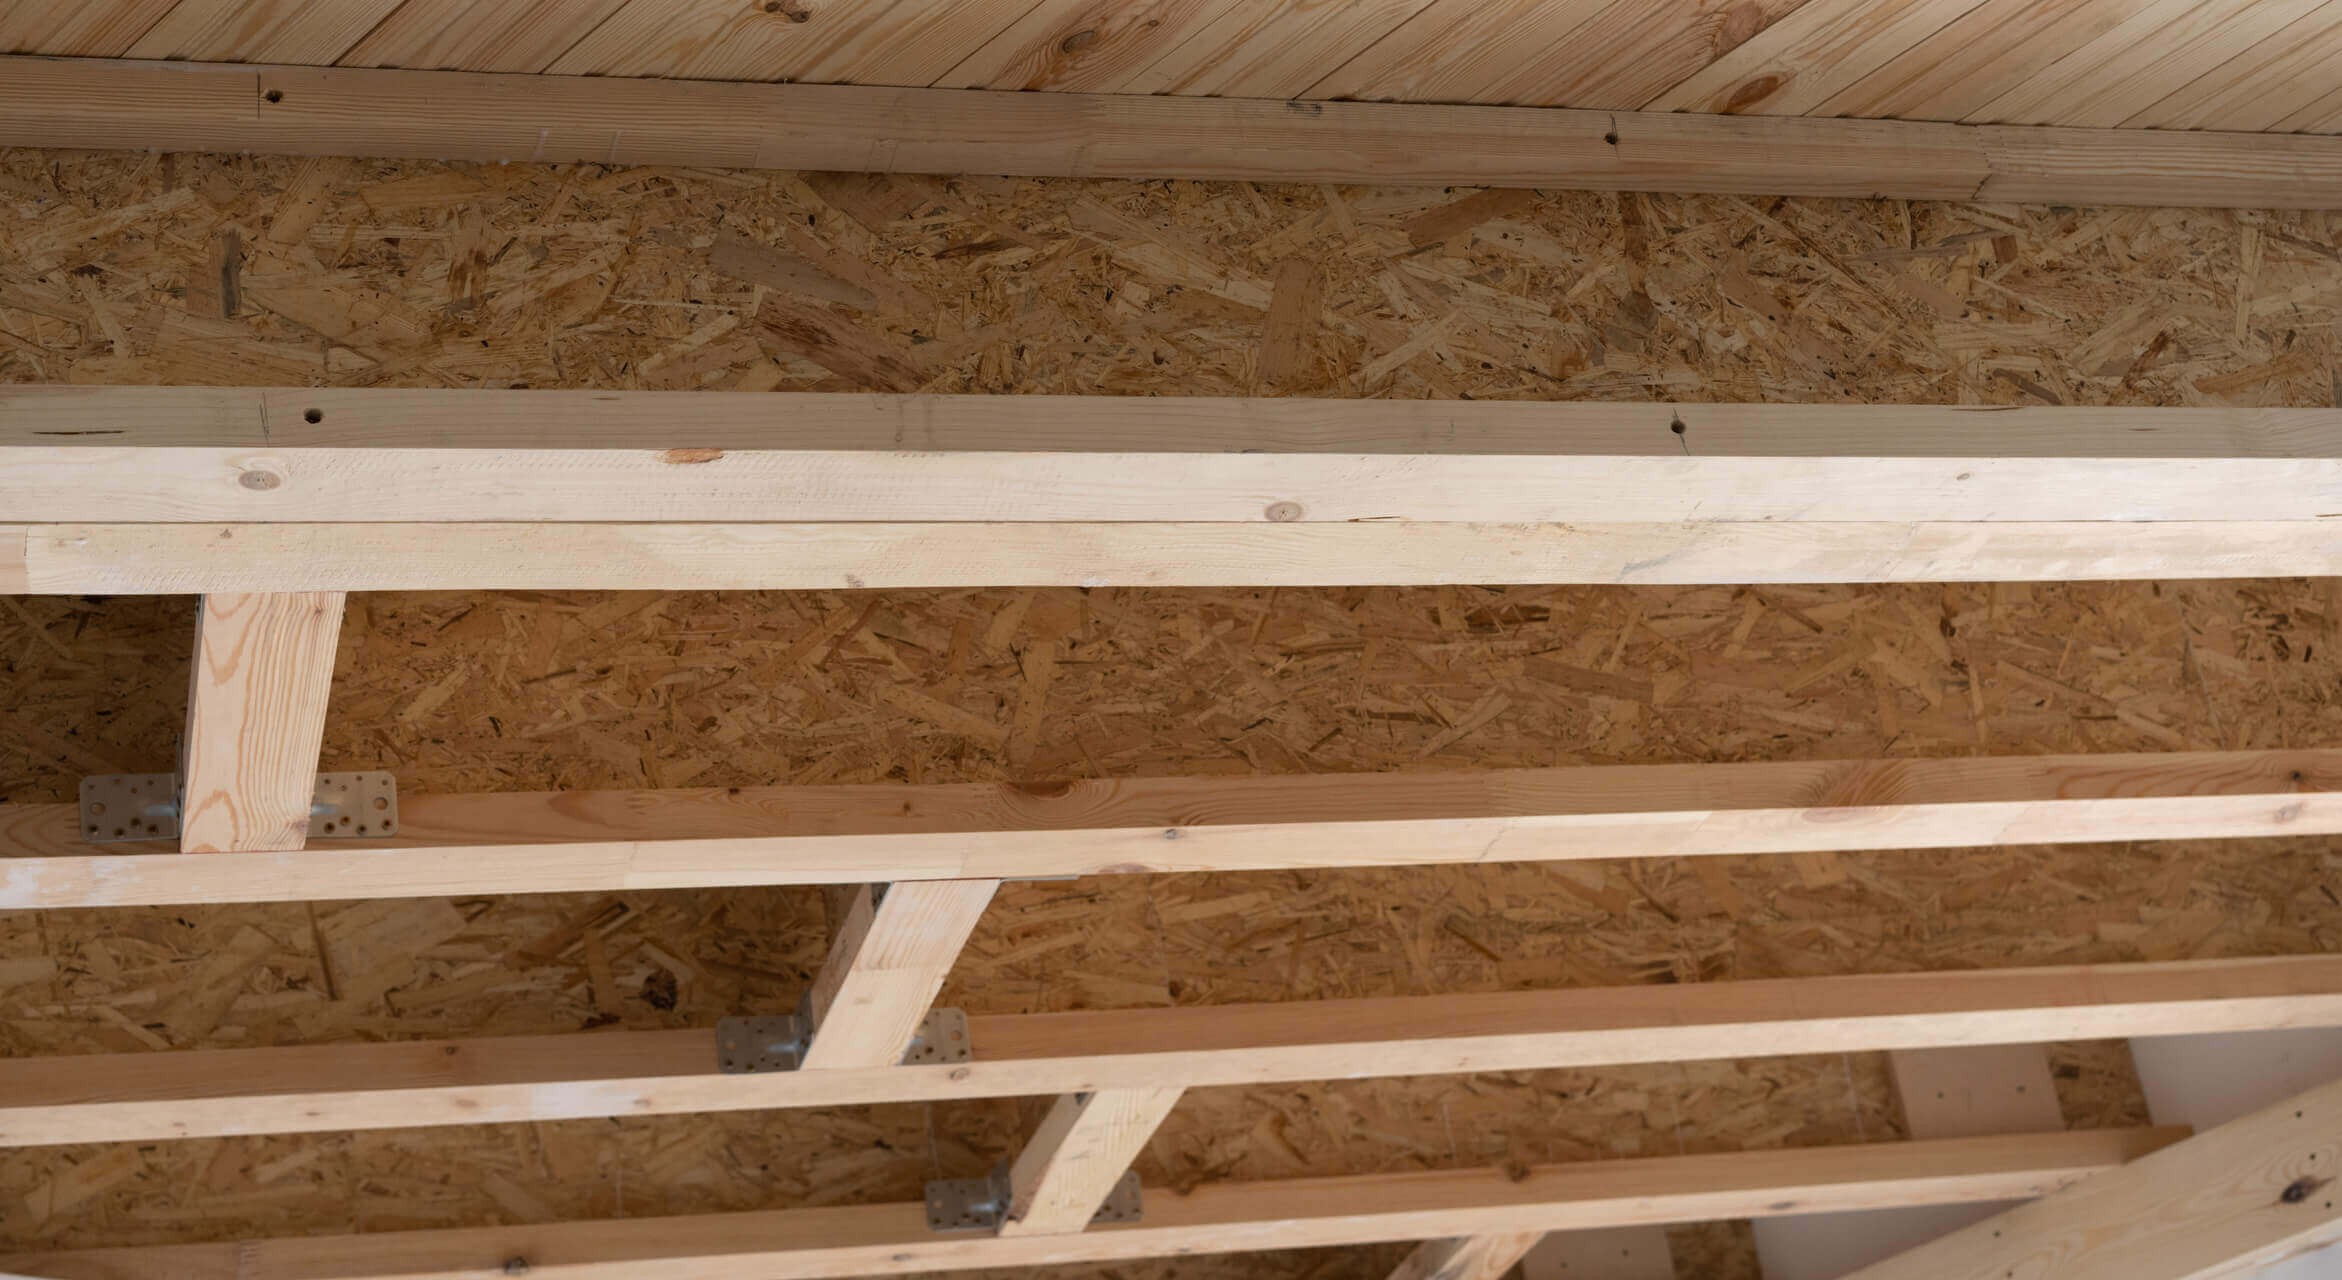 The interior roof of a quality, wooden shed.